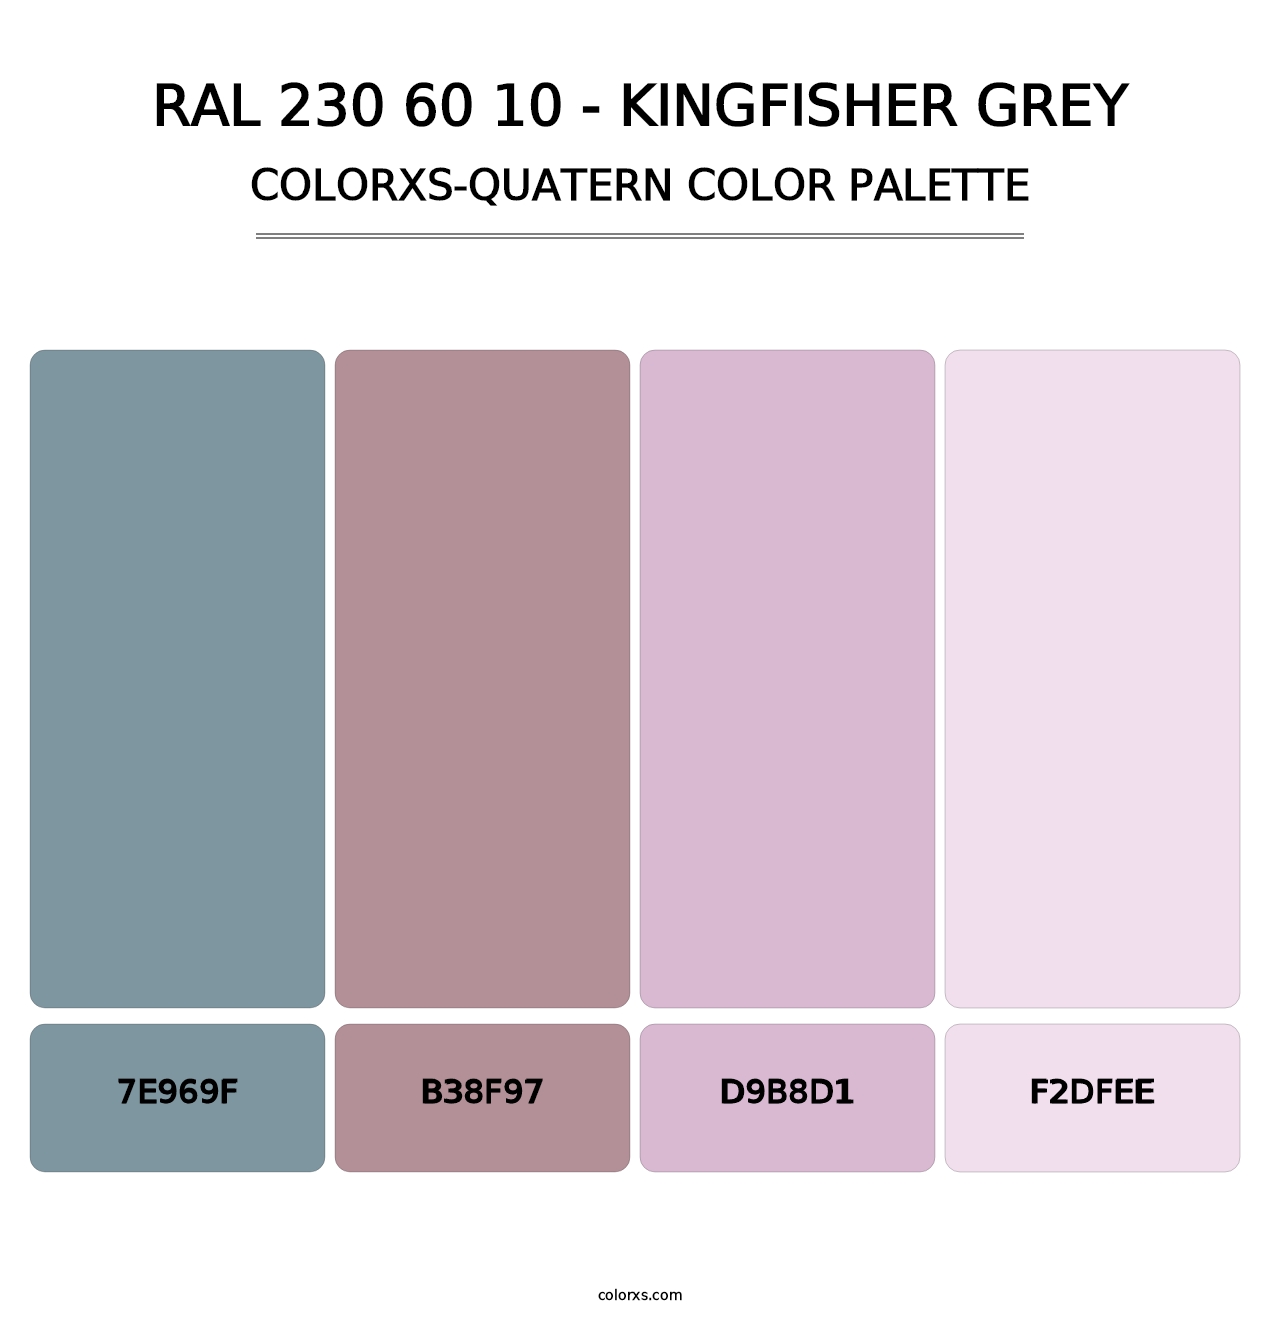 RAL 230 60 10 - Kingfisher Grey - Colorxs Quatern Palette